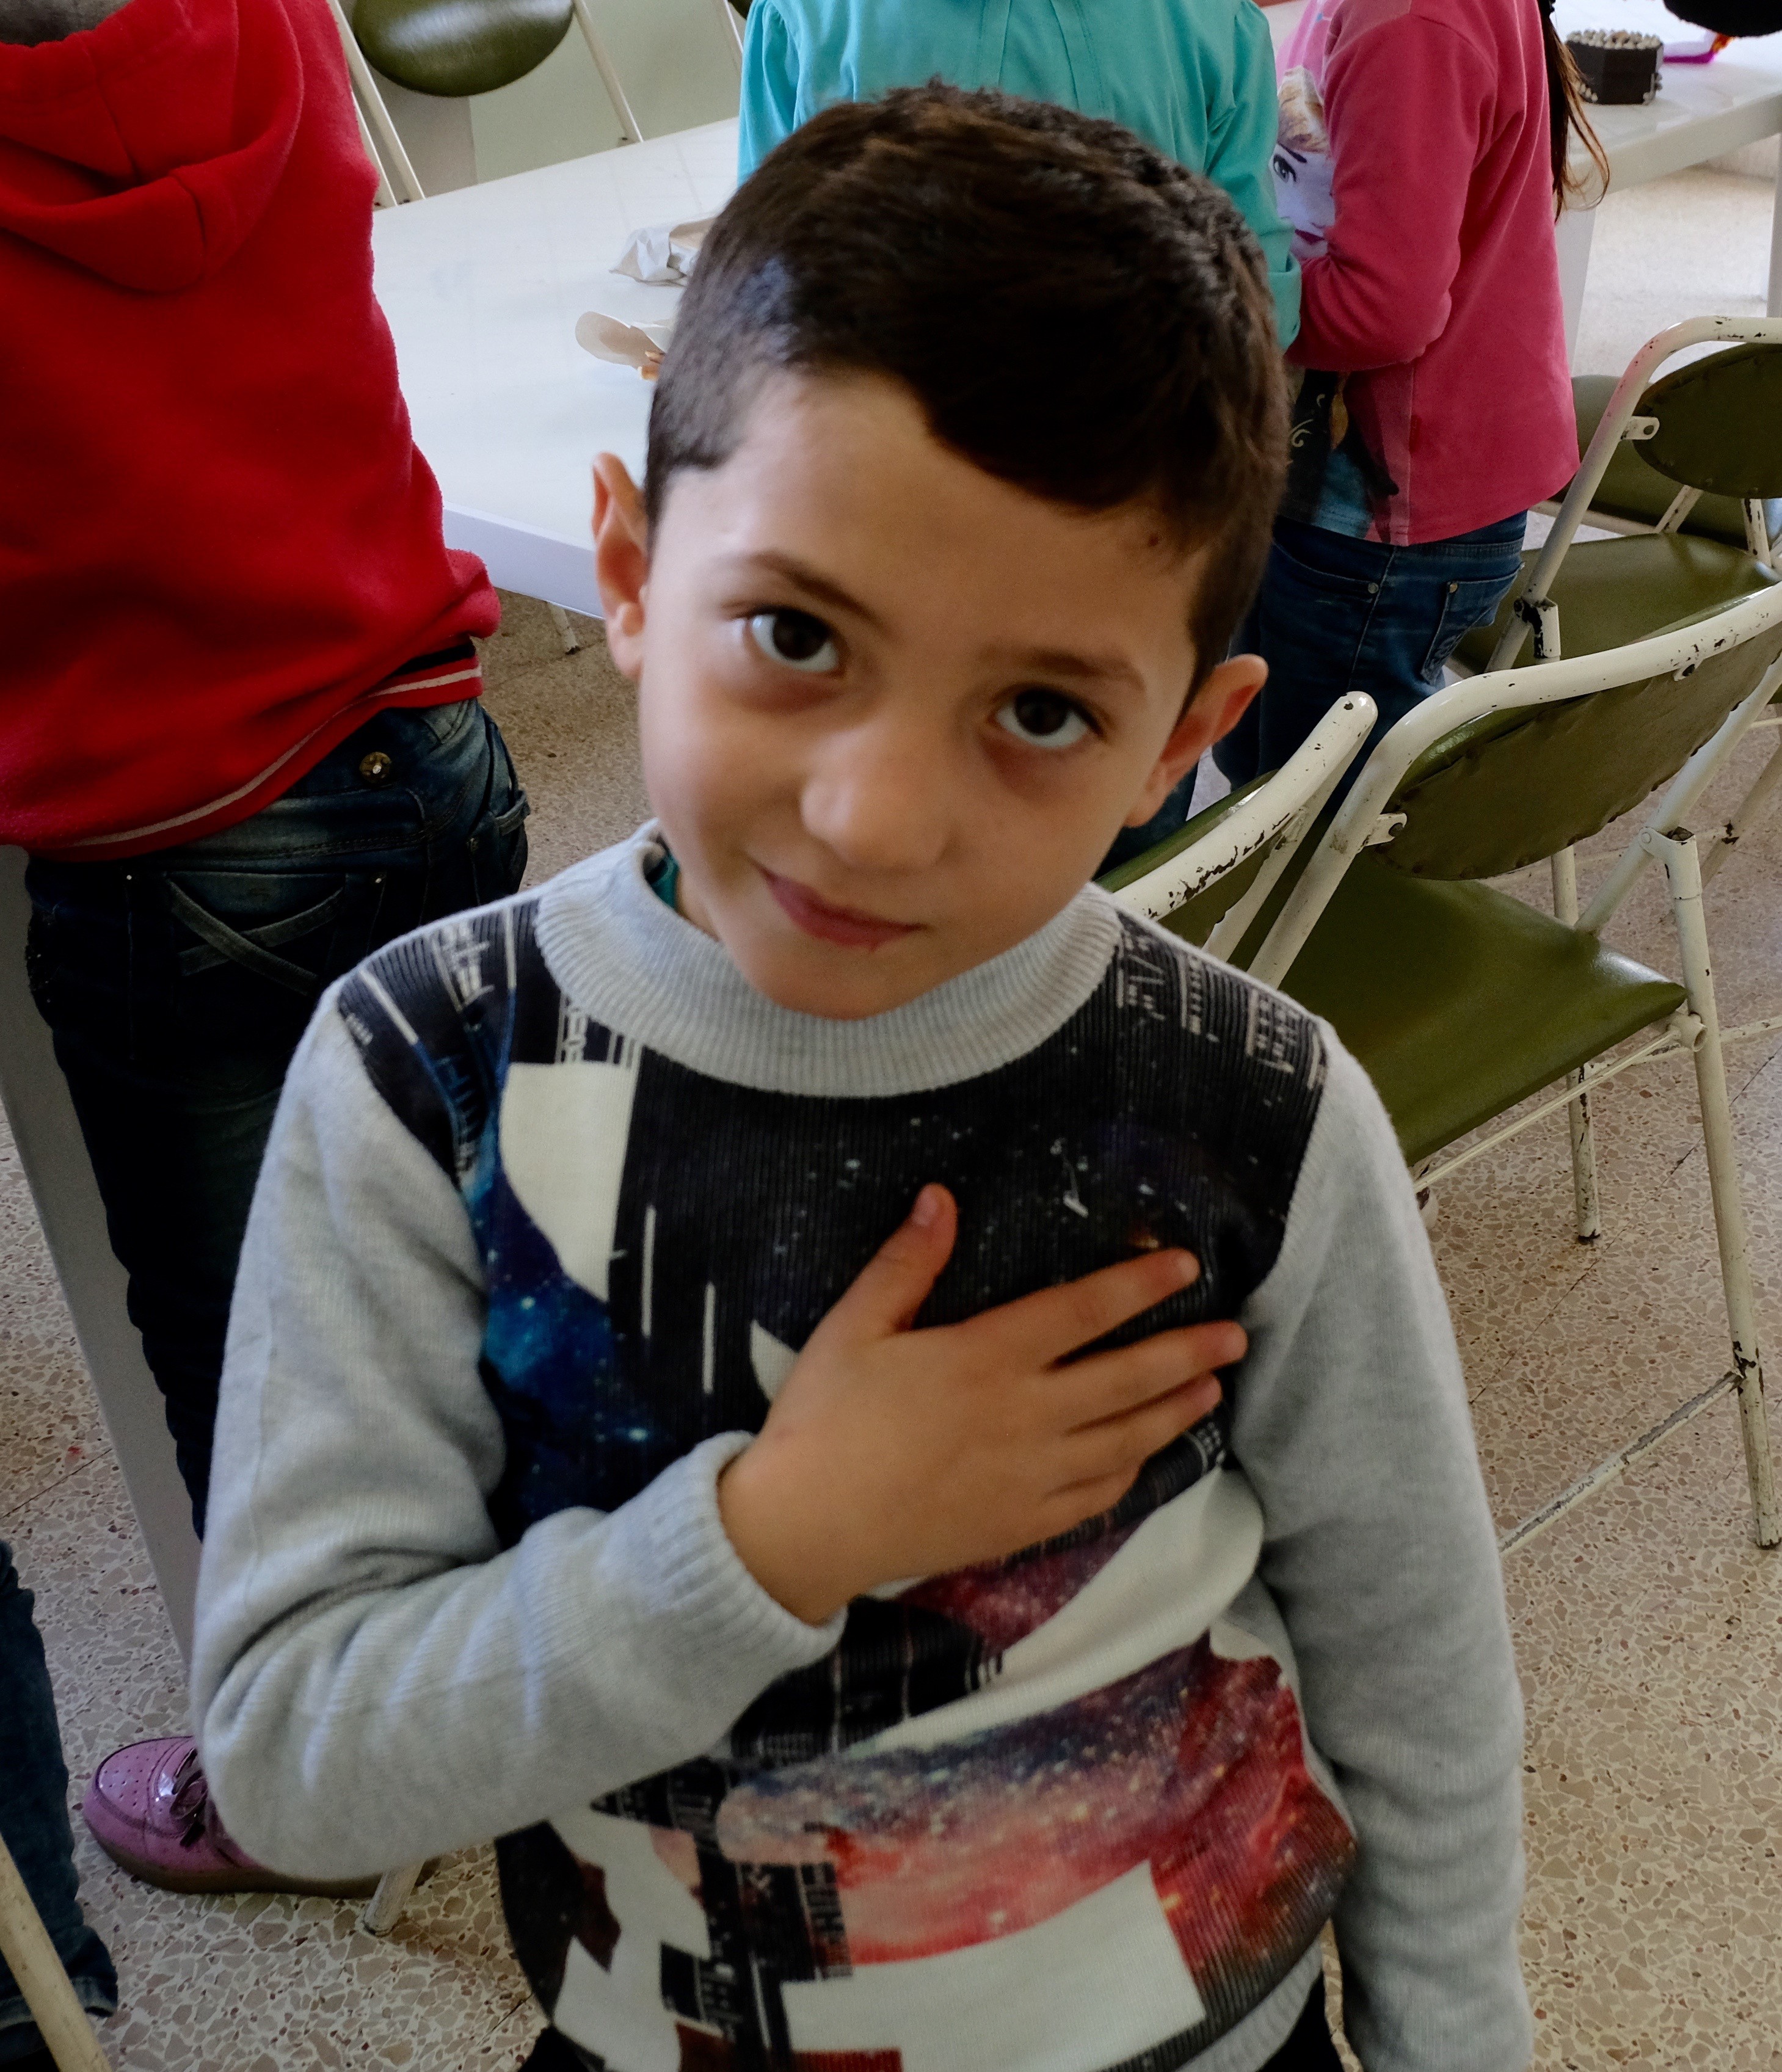 "This is the only time each week that I feel happy.” The Strong Kids program helps facilitate a “safe space” for refugee kids to heal in the midst of immense stress and transition.